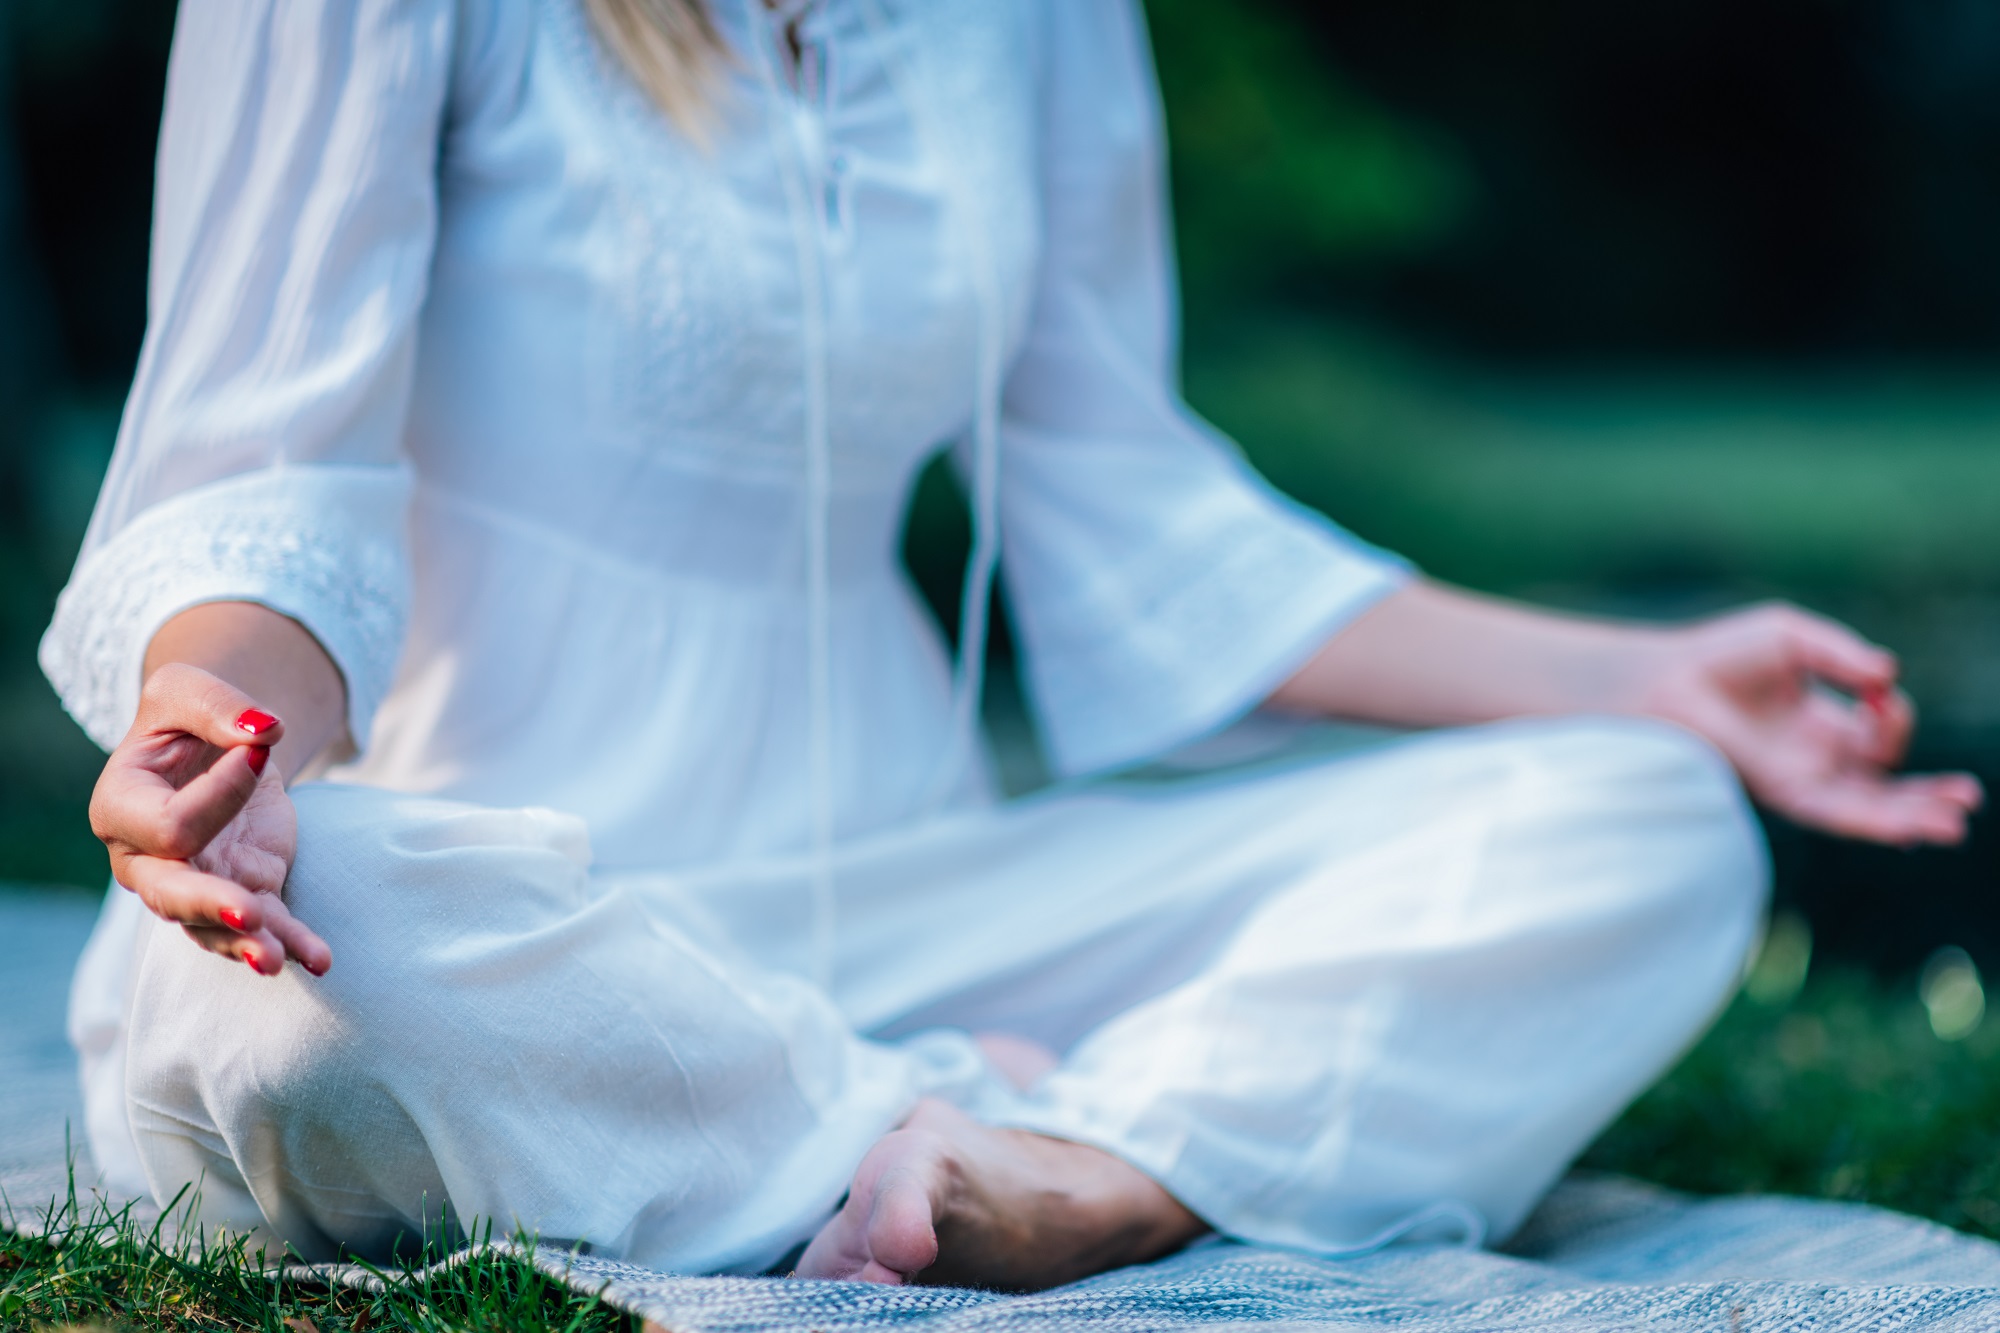 Self care for caregivers with meditation